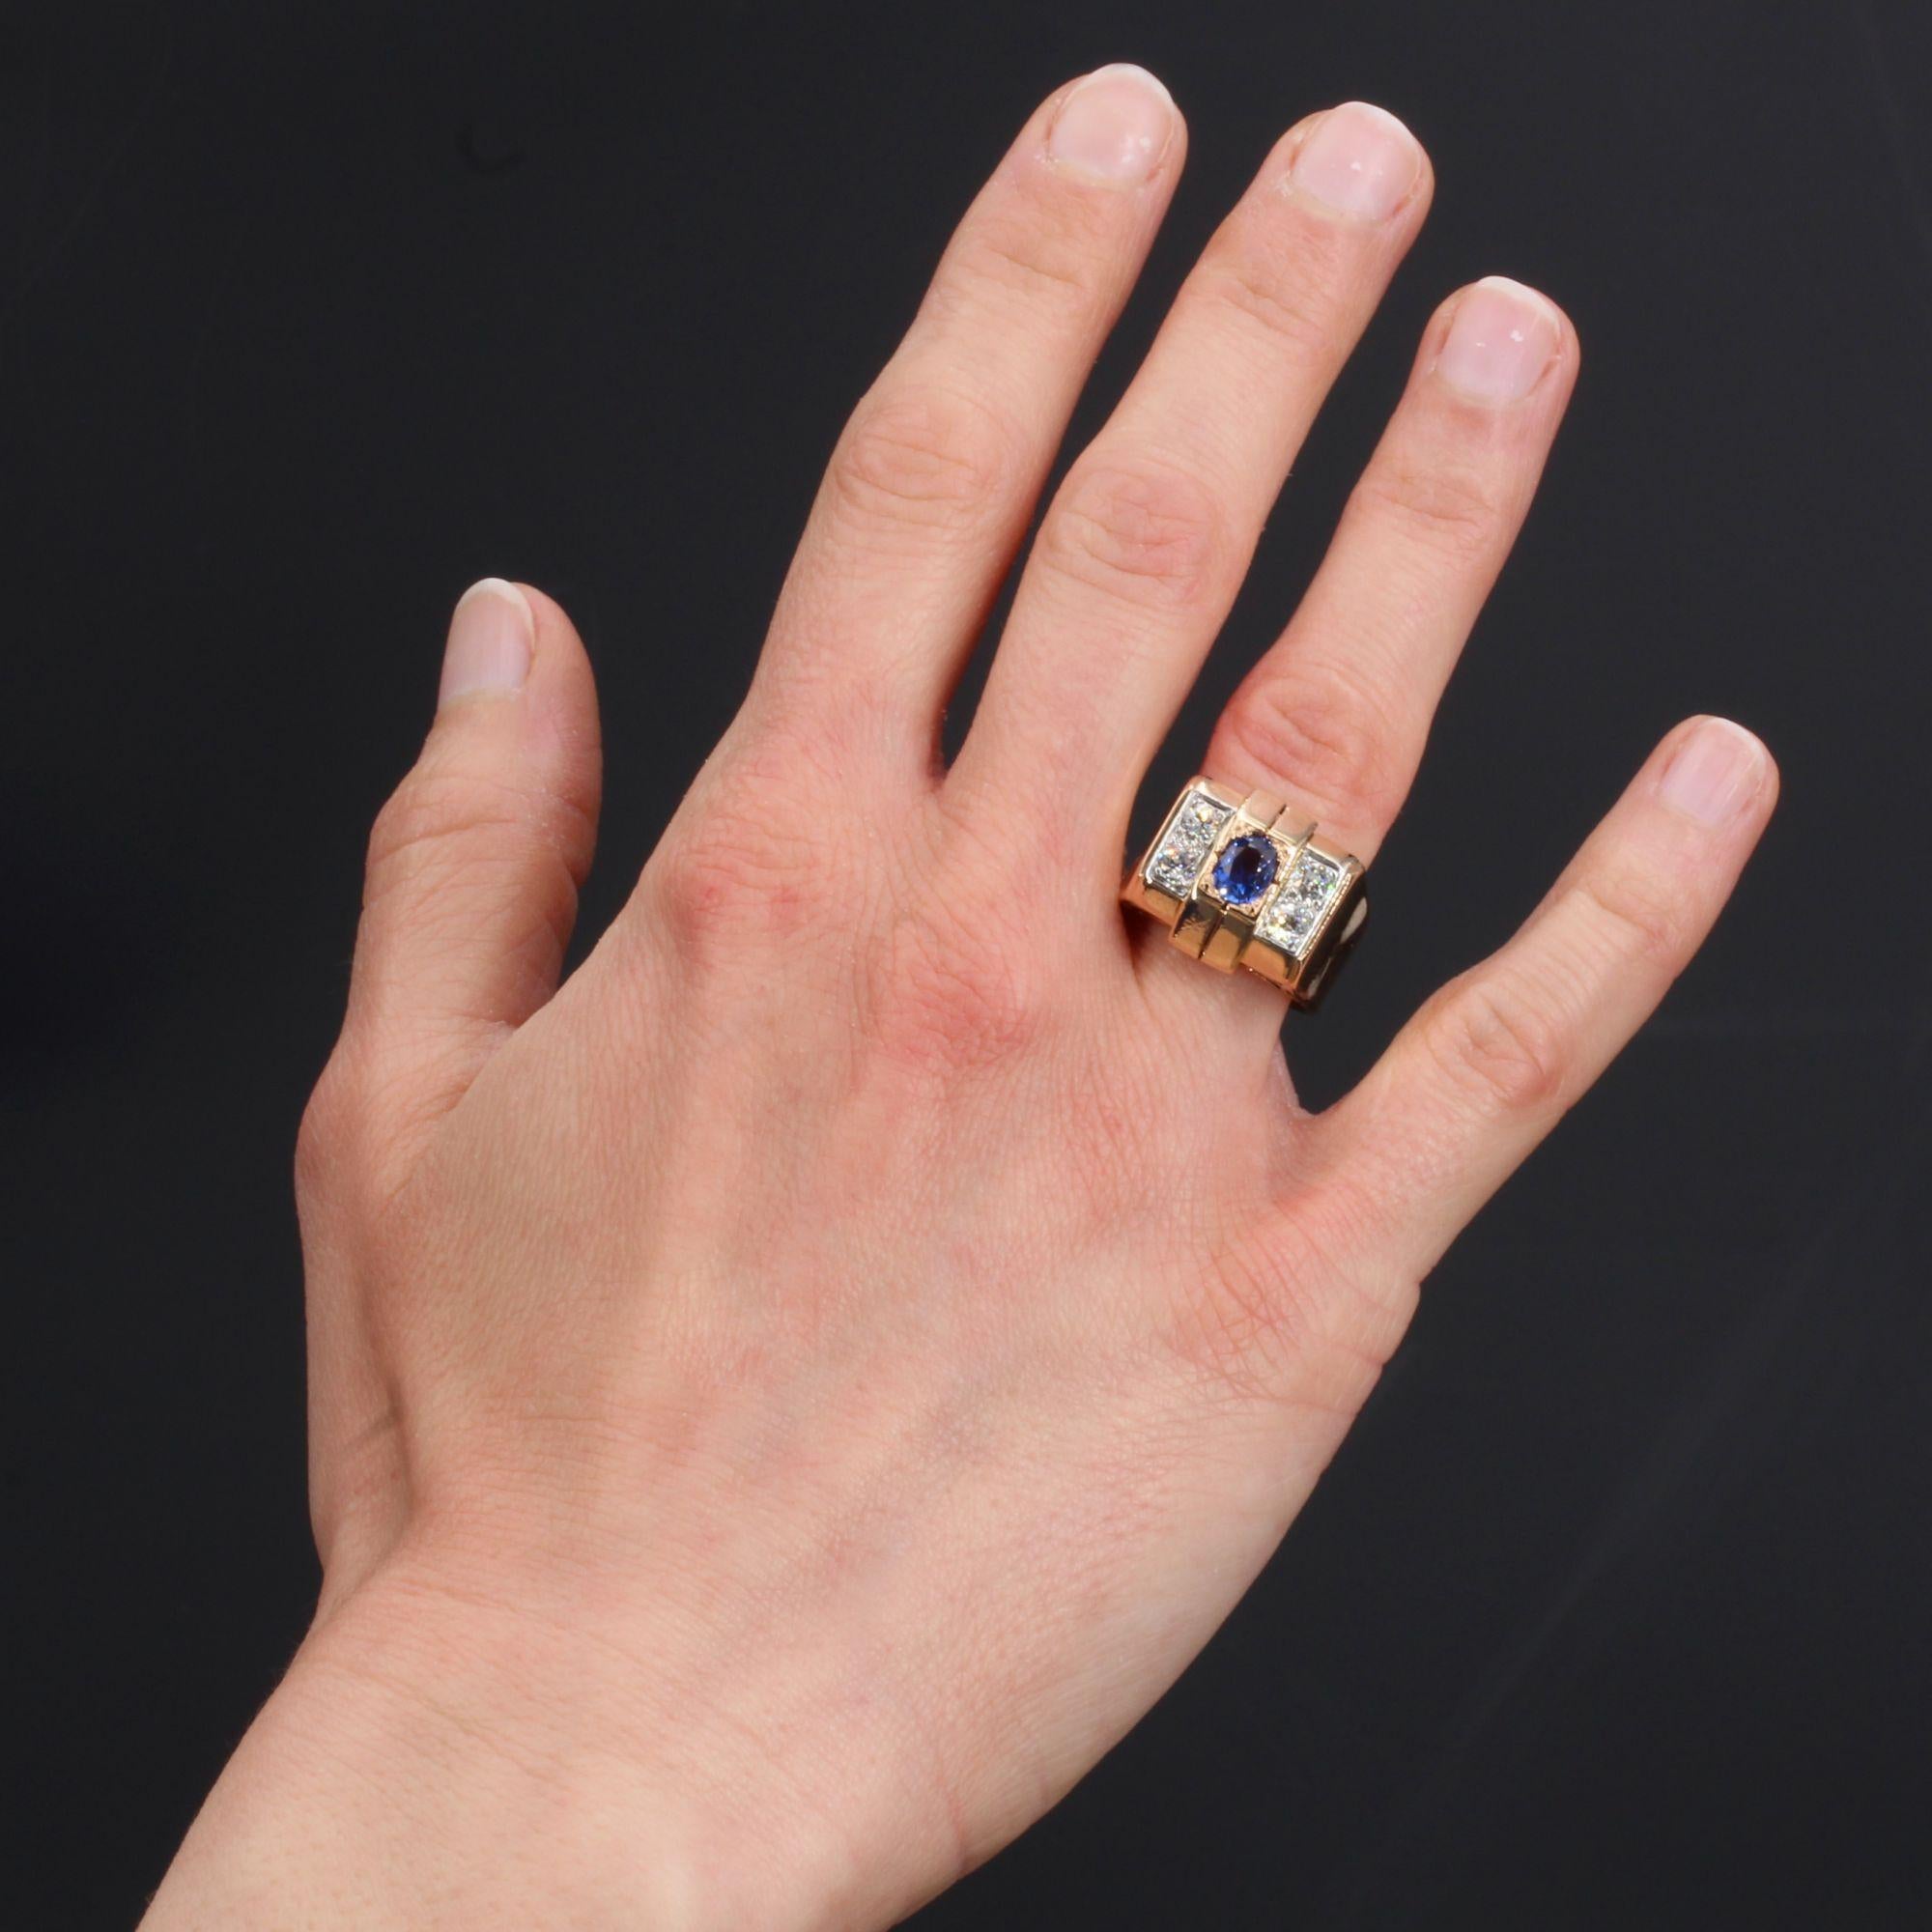 Ring in 18 karat rose gold, eagle head hallmark and platinum dog head hallmark.
Sublime tank ring it is decorated on its top of an intense blue sapphire, supported on both sides by 2x2 antique brilliant- cut diamonds. The setting is openwored with